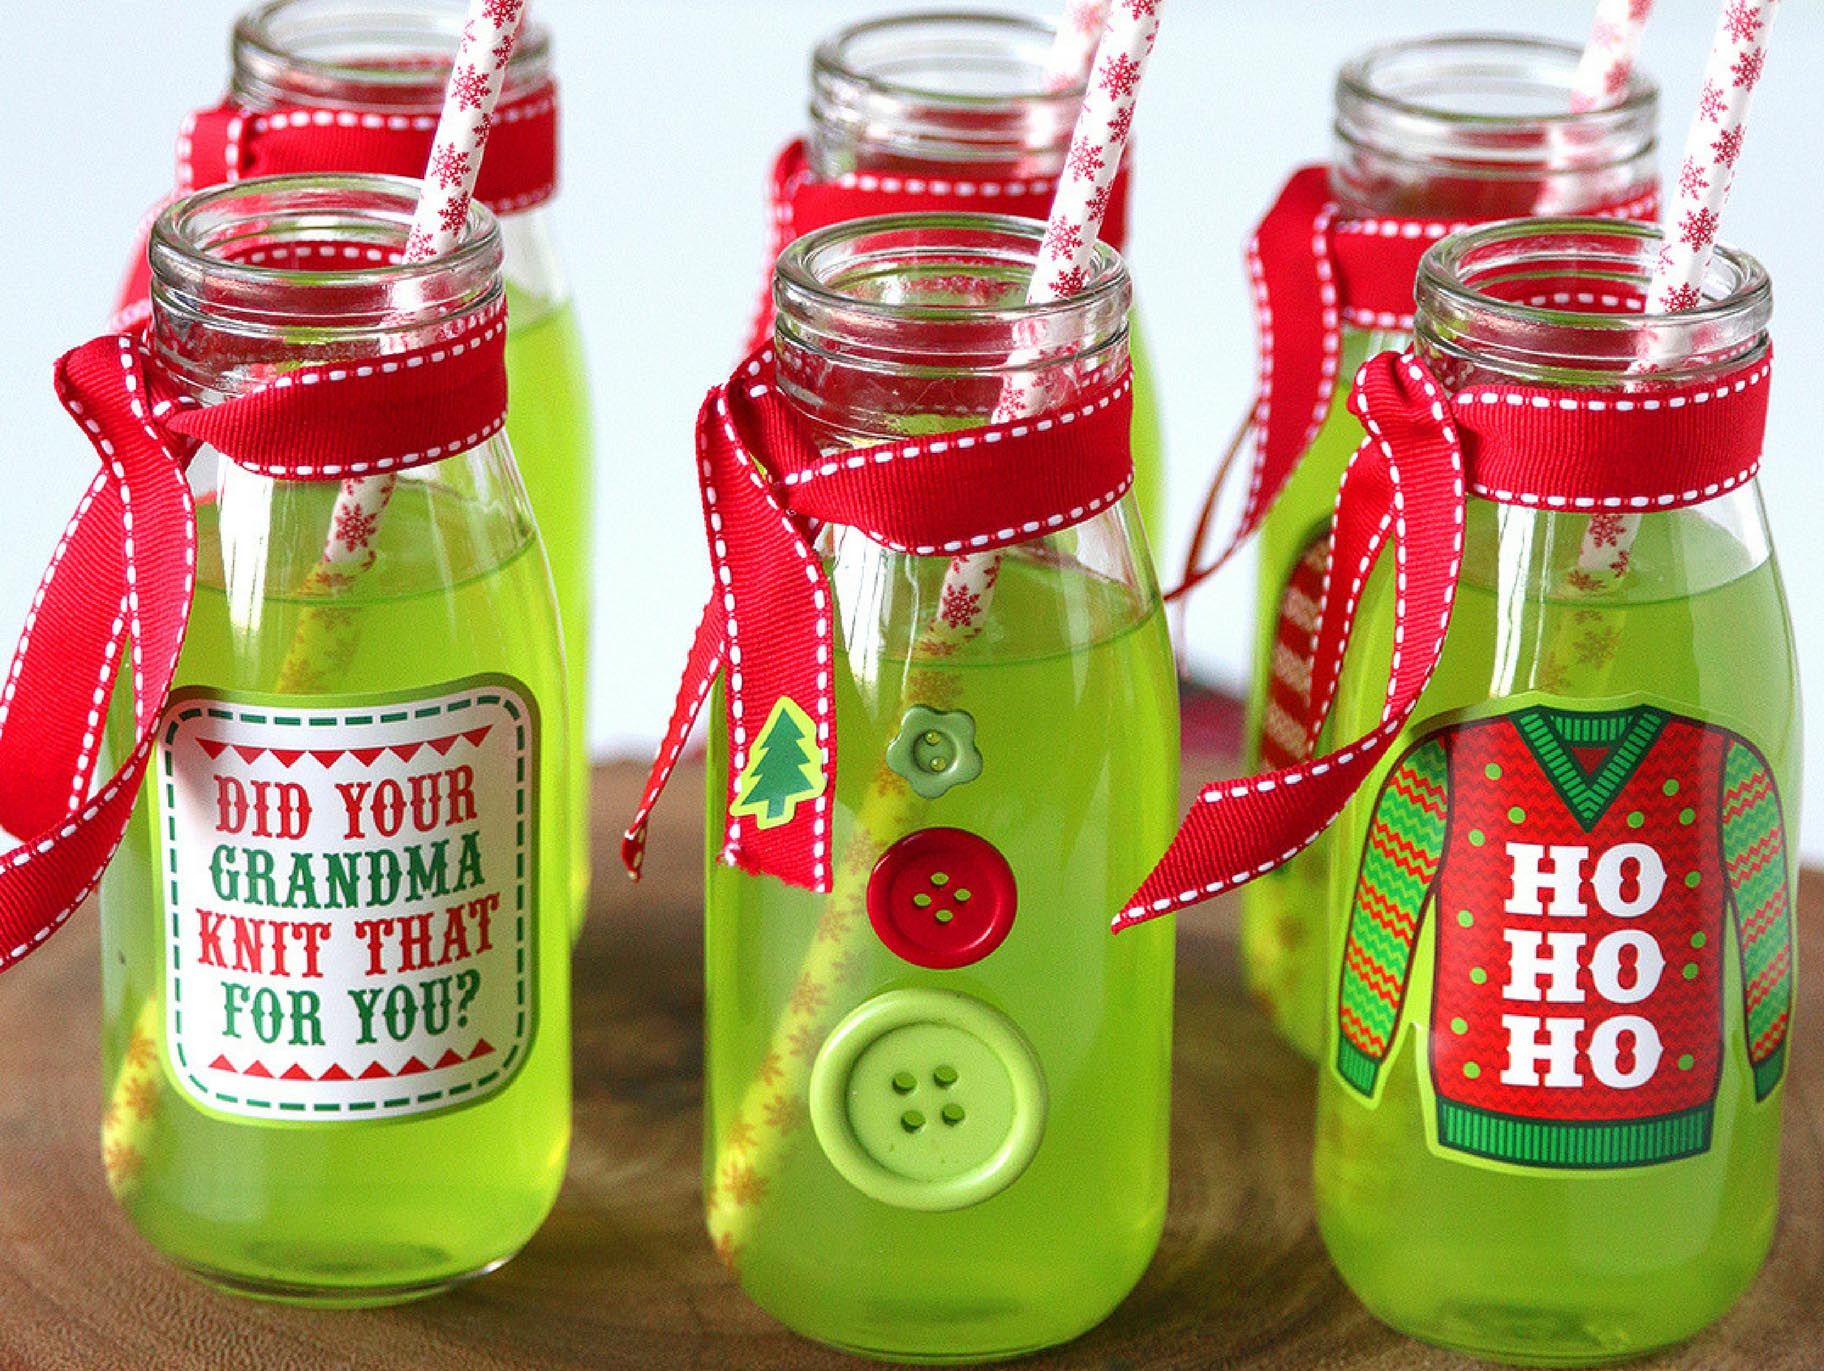  Ugly Christmas Sweater Holiday Drinking Gift Idea